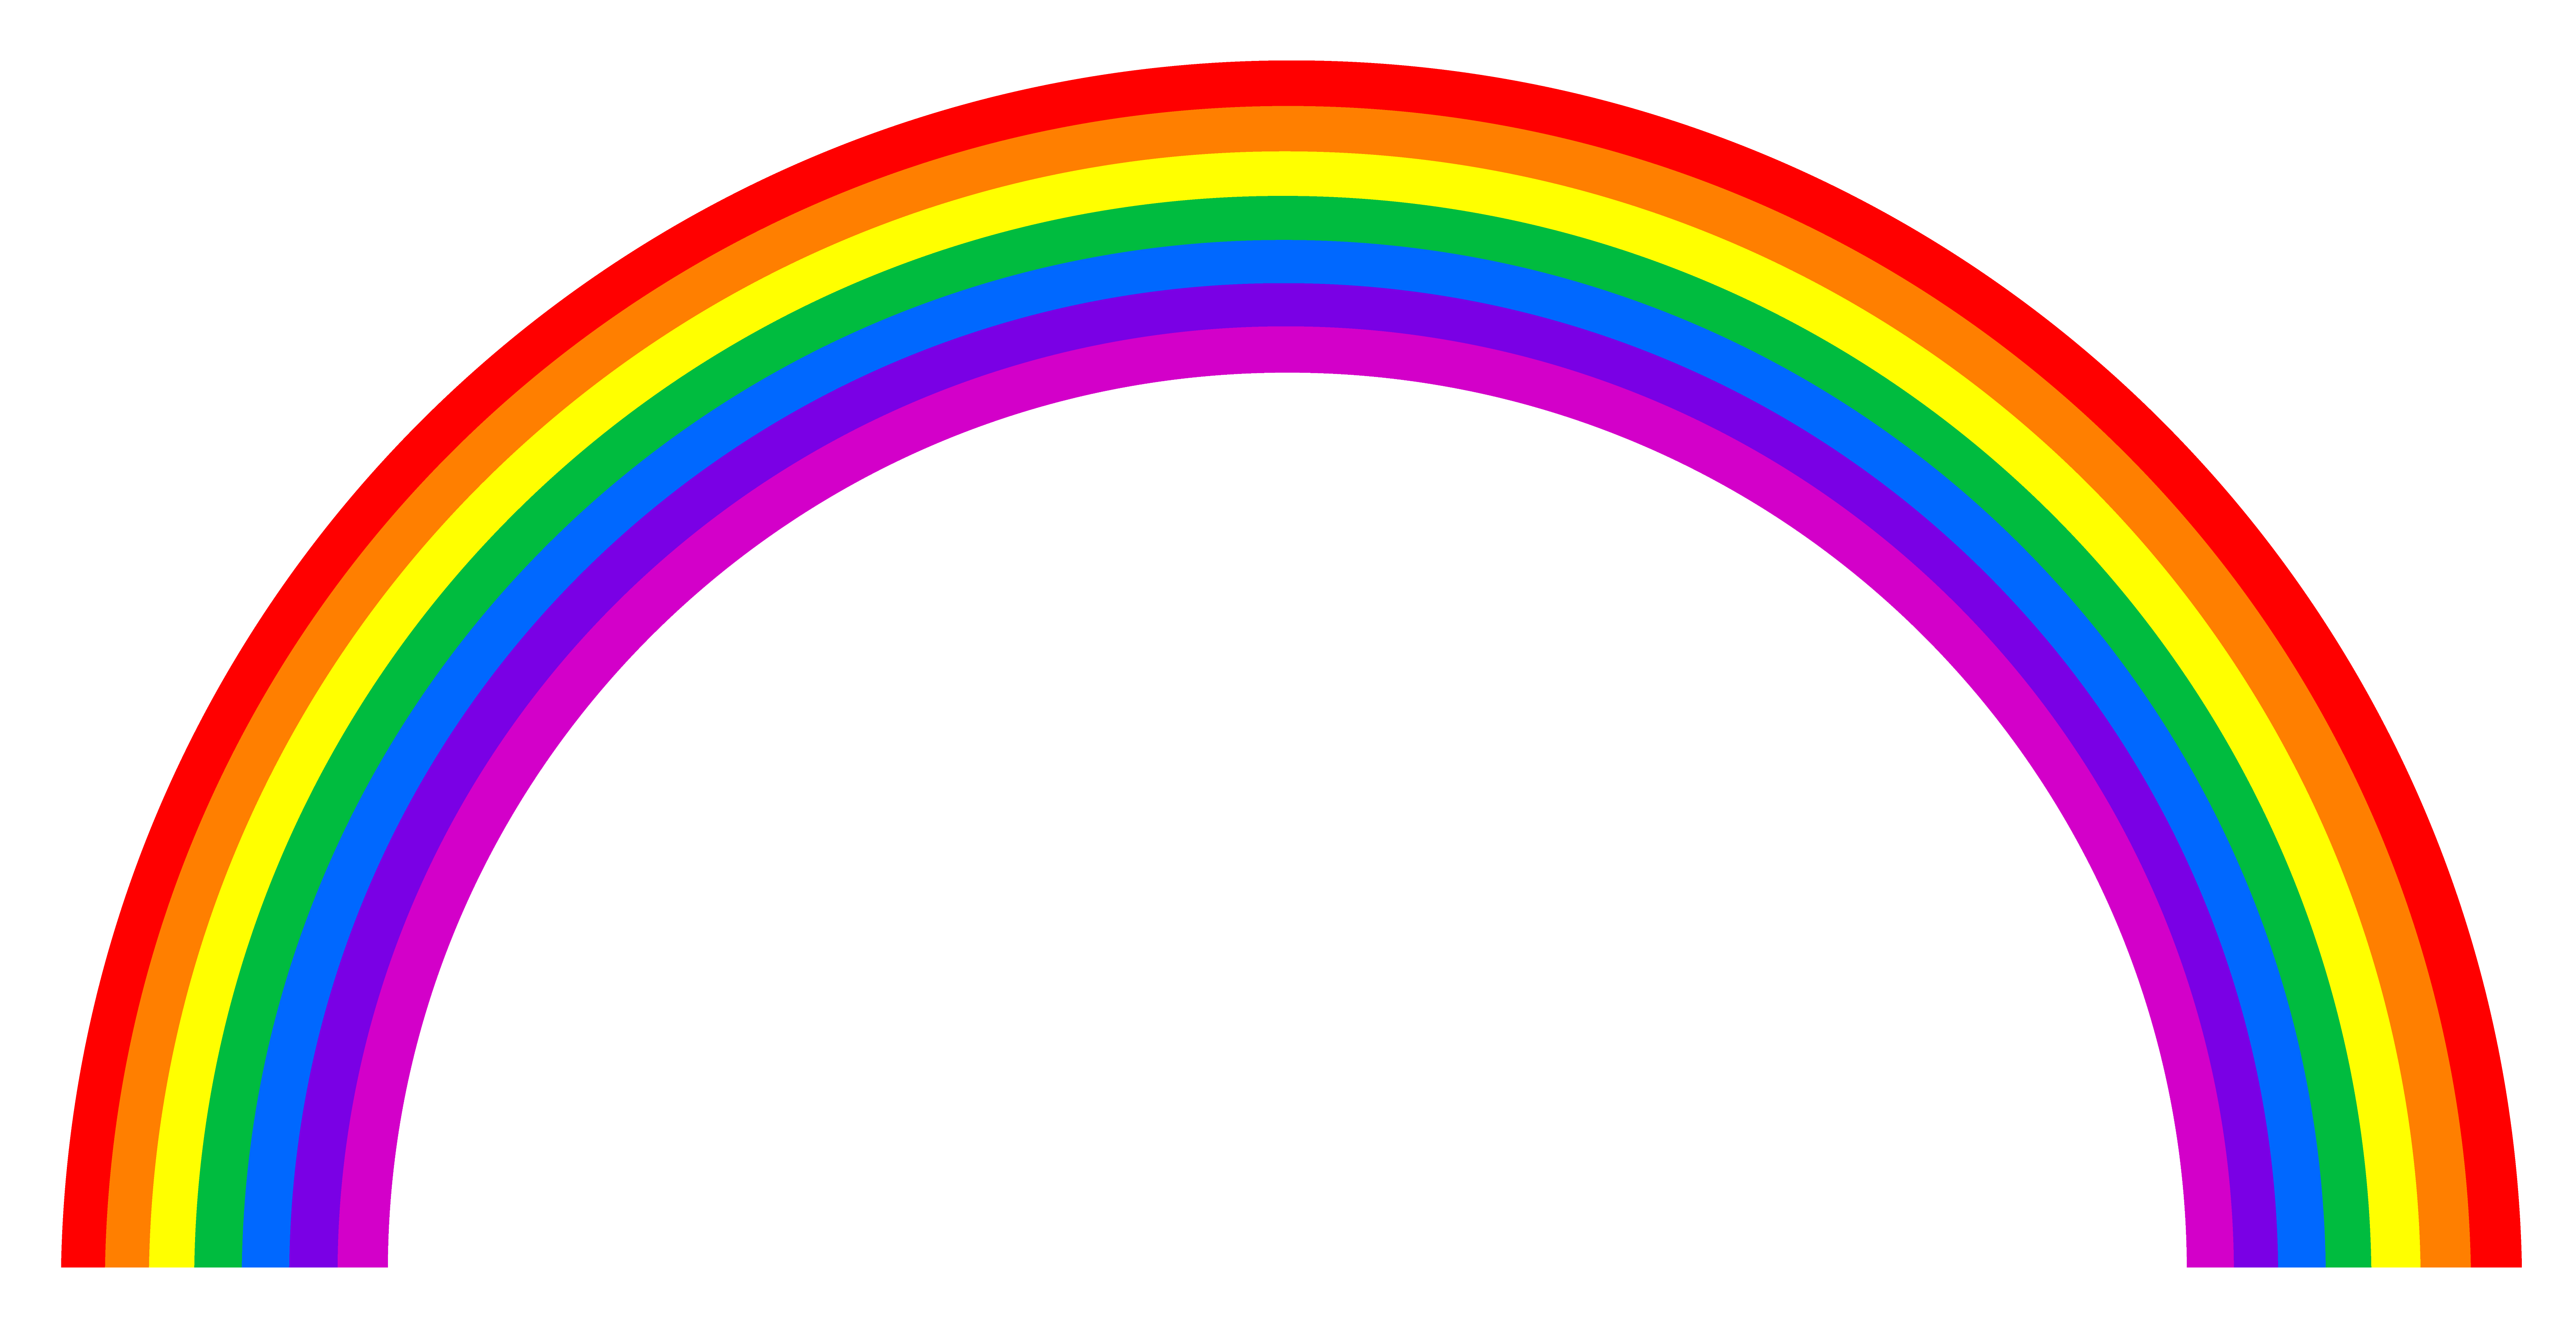 Rainbow Clipart Black And White | Clipart Panda - Free Clipart Images